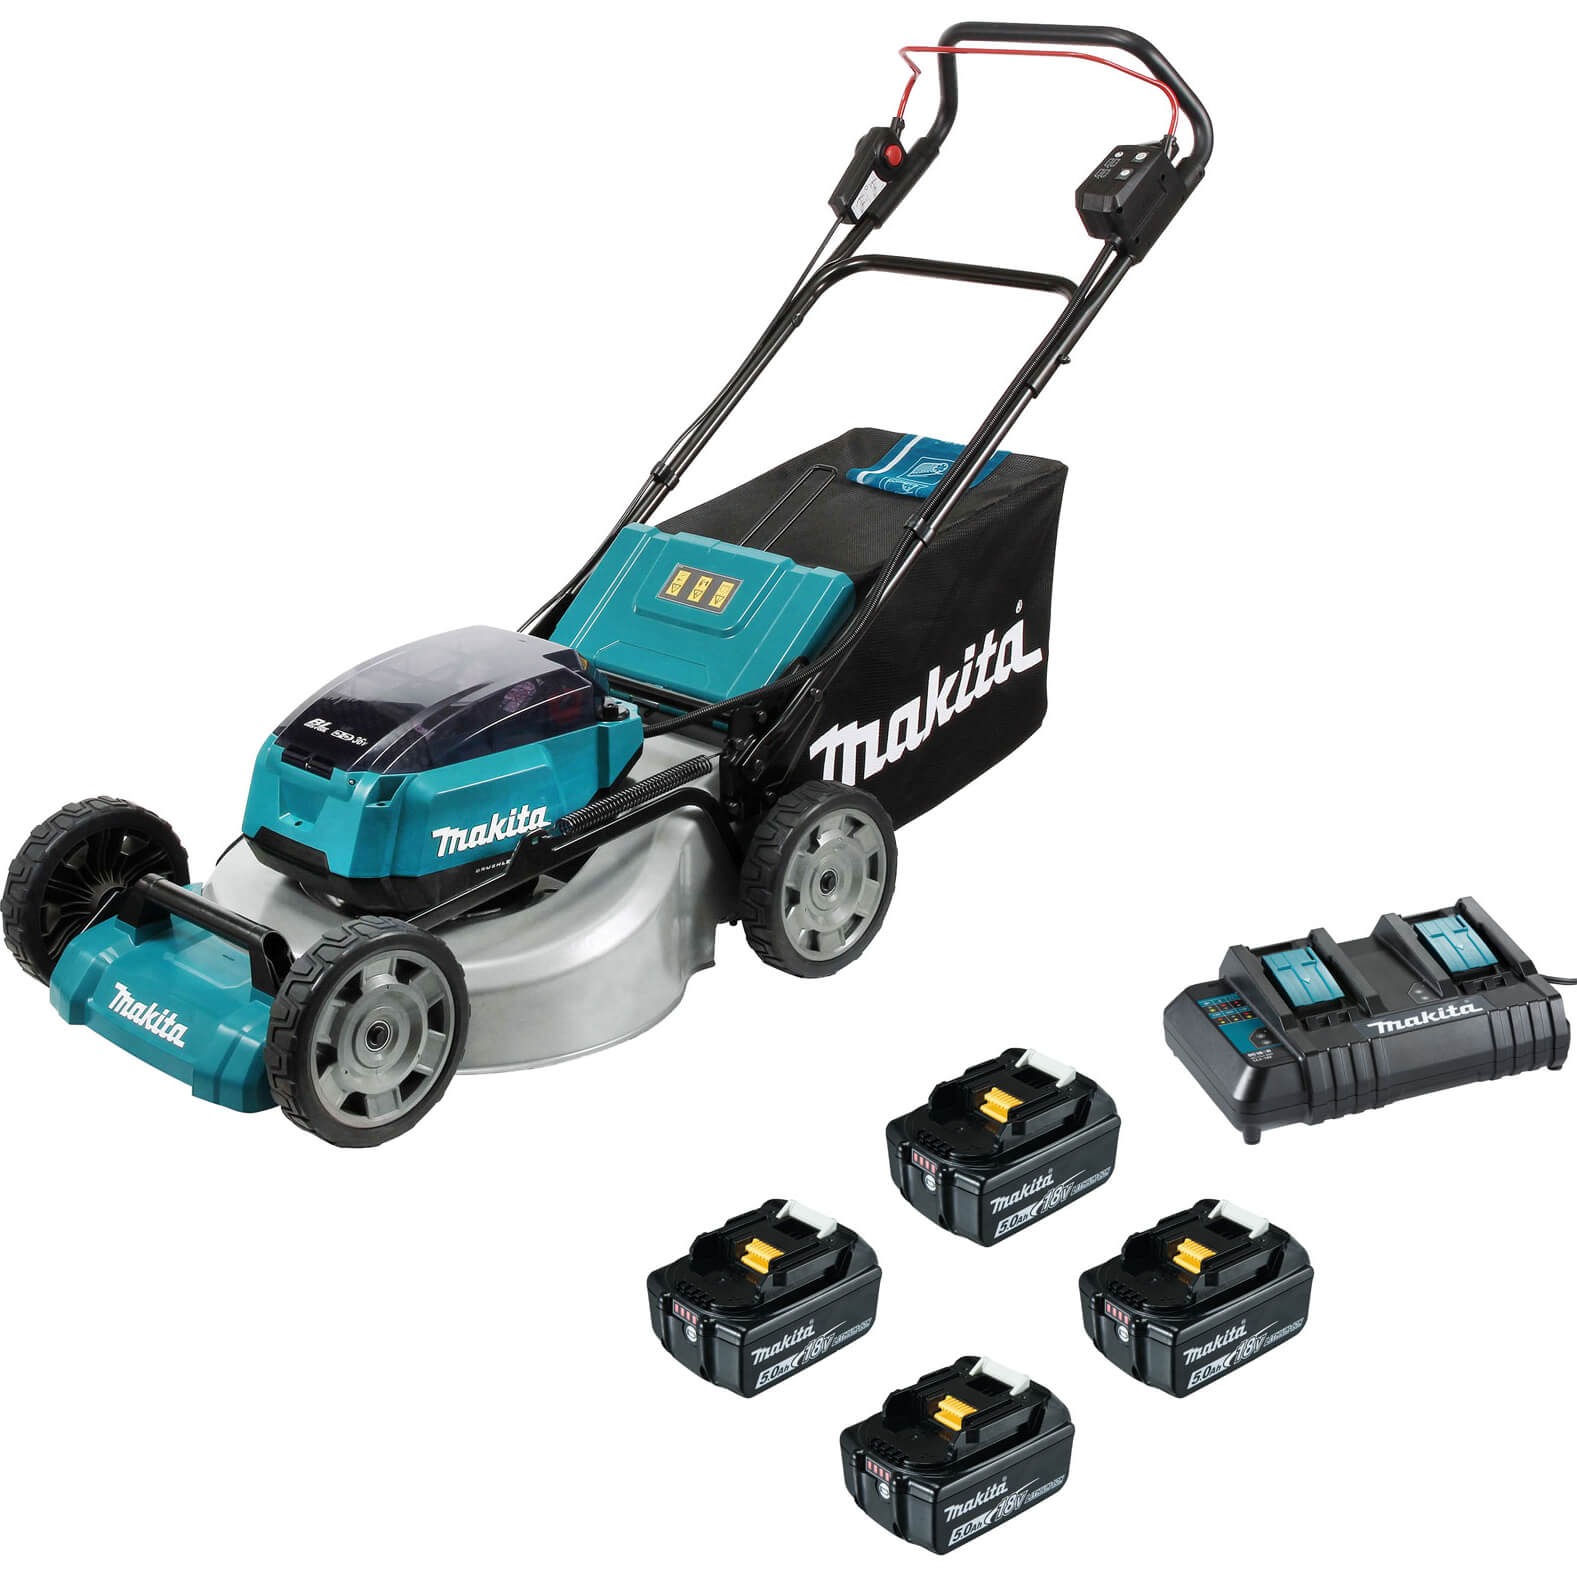 Image of Makita DLM530 Twin 18v LXT Cordless Brushless Lawnmower 530mm 4 x 5ah Li-ion Charger